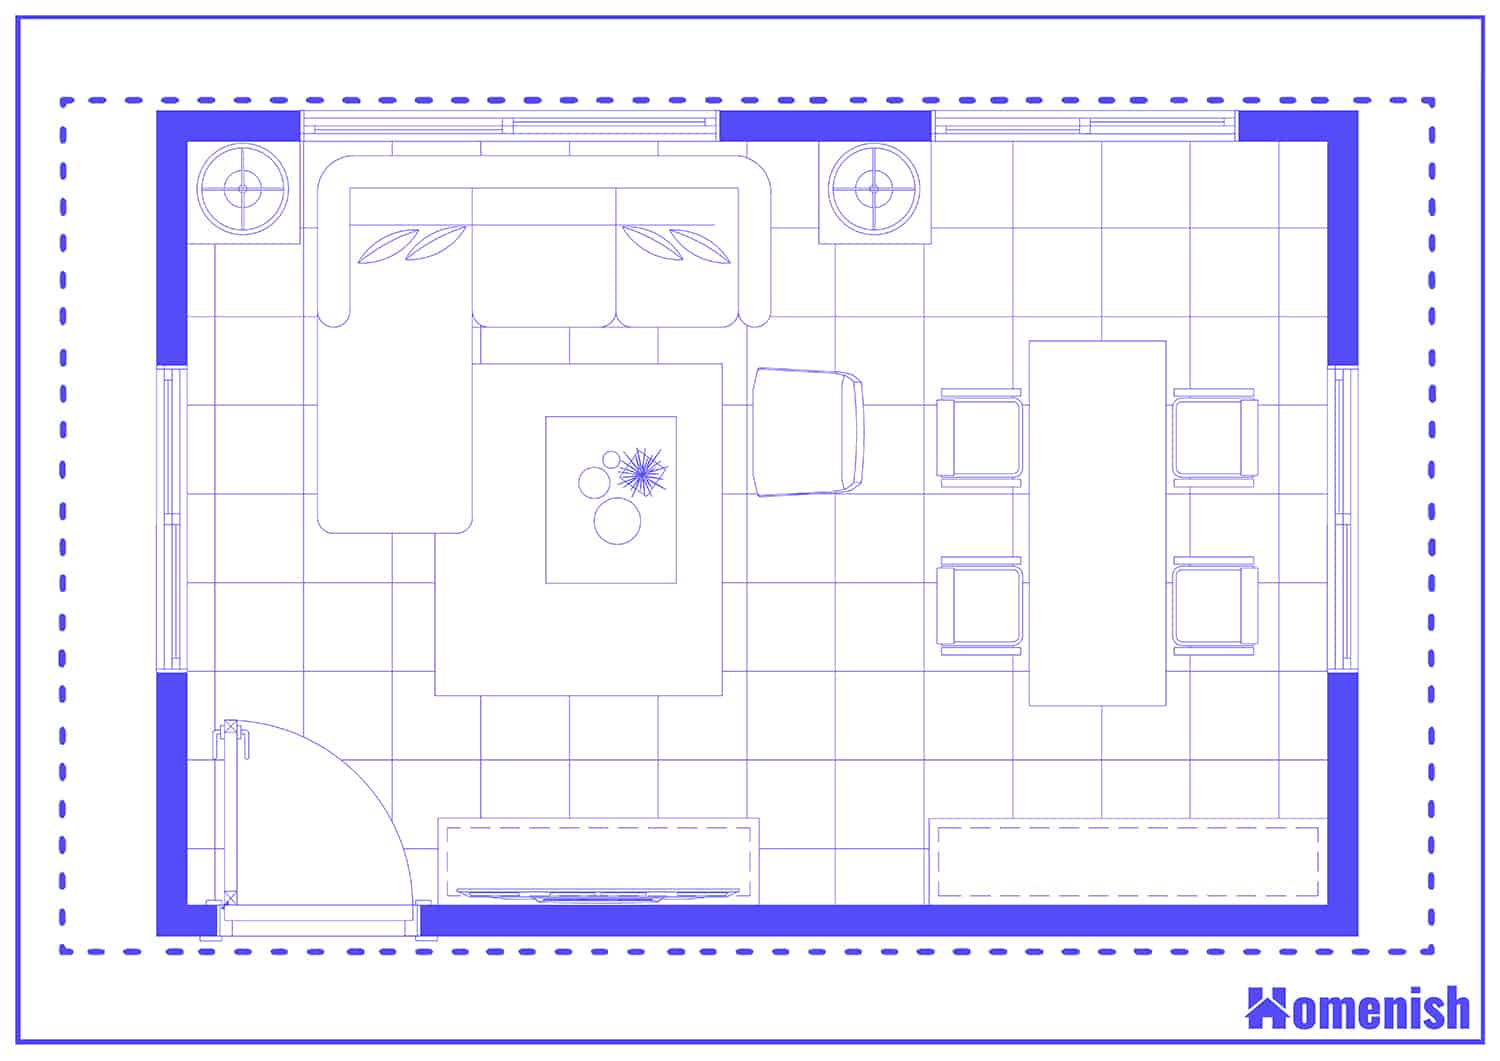 Lounge and Diner Layout Floor Plan